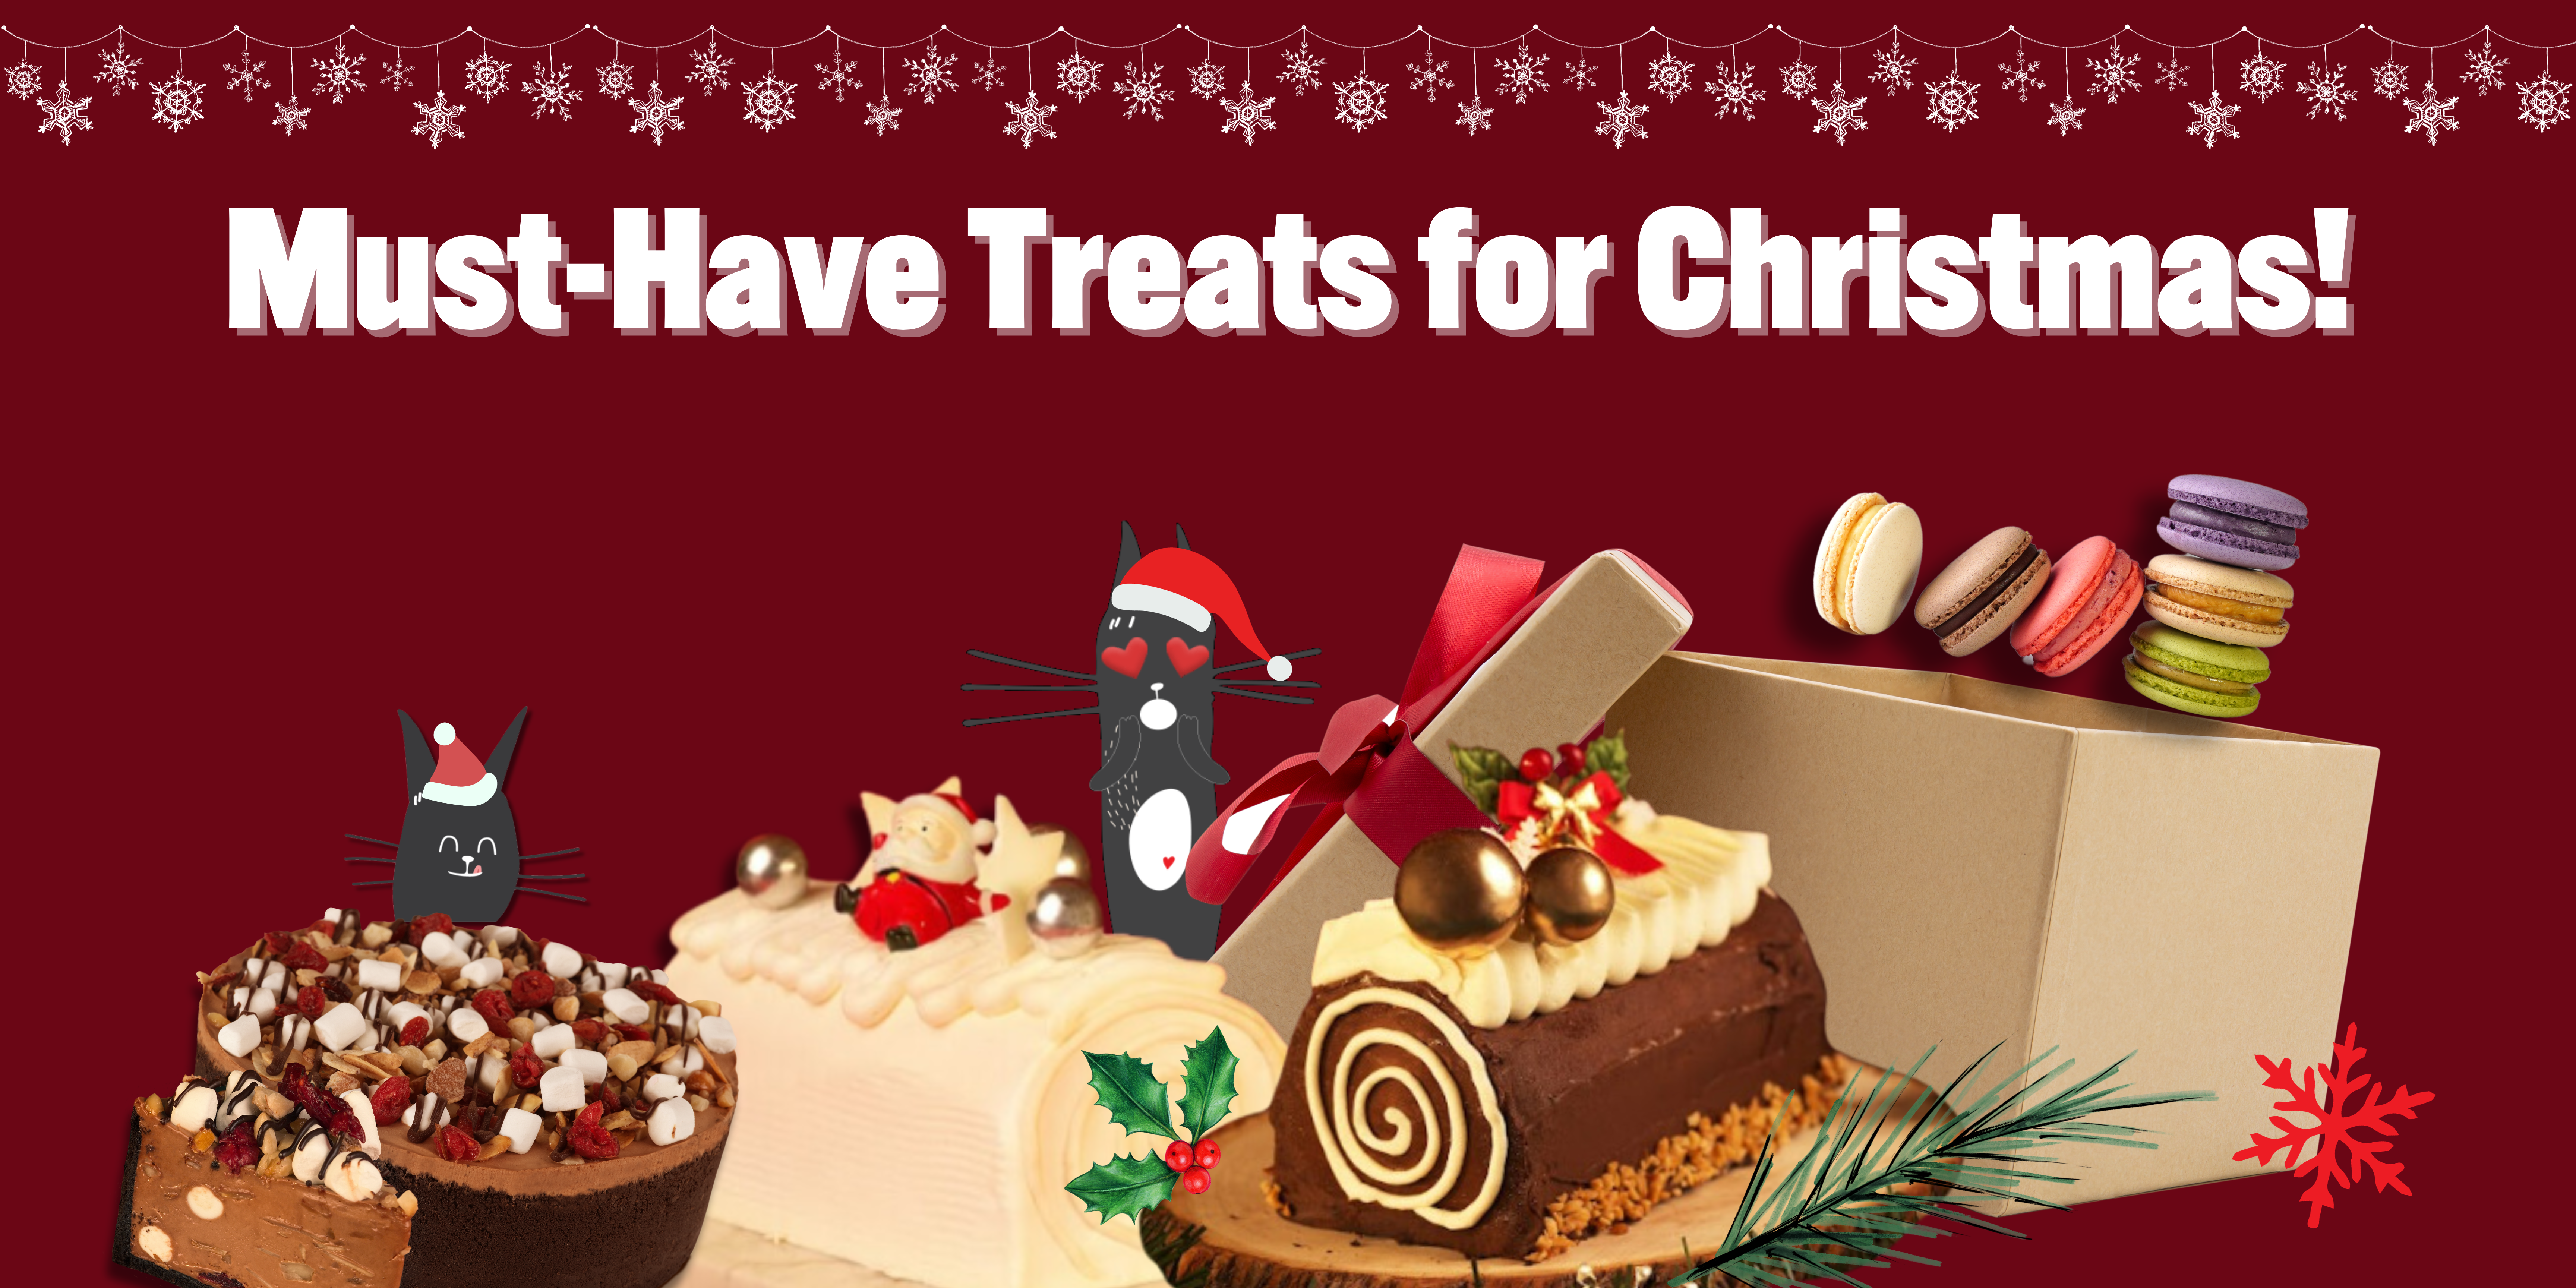 Must-Have Treats for Christmas! (5).png__PID:c05767c4-4deb-45df-b2a0-5d4514940a8f